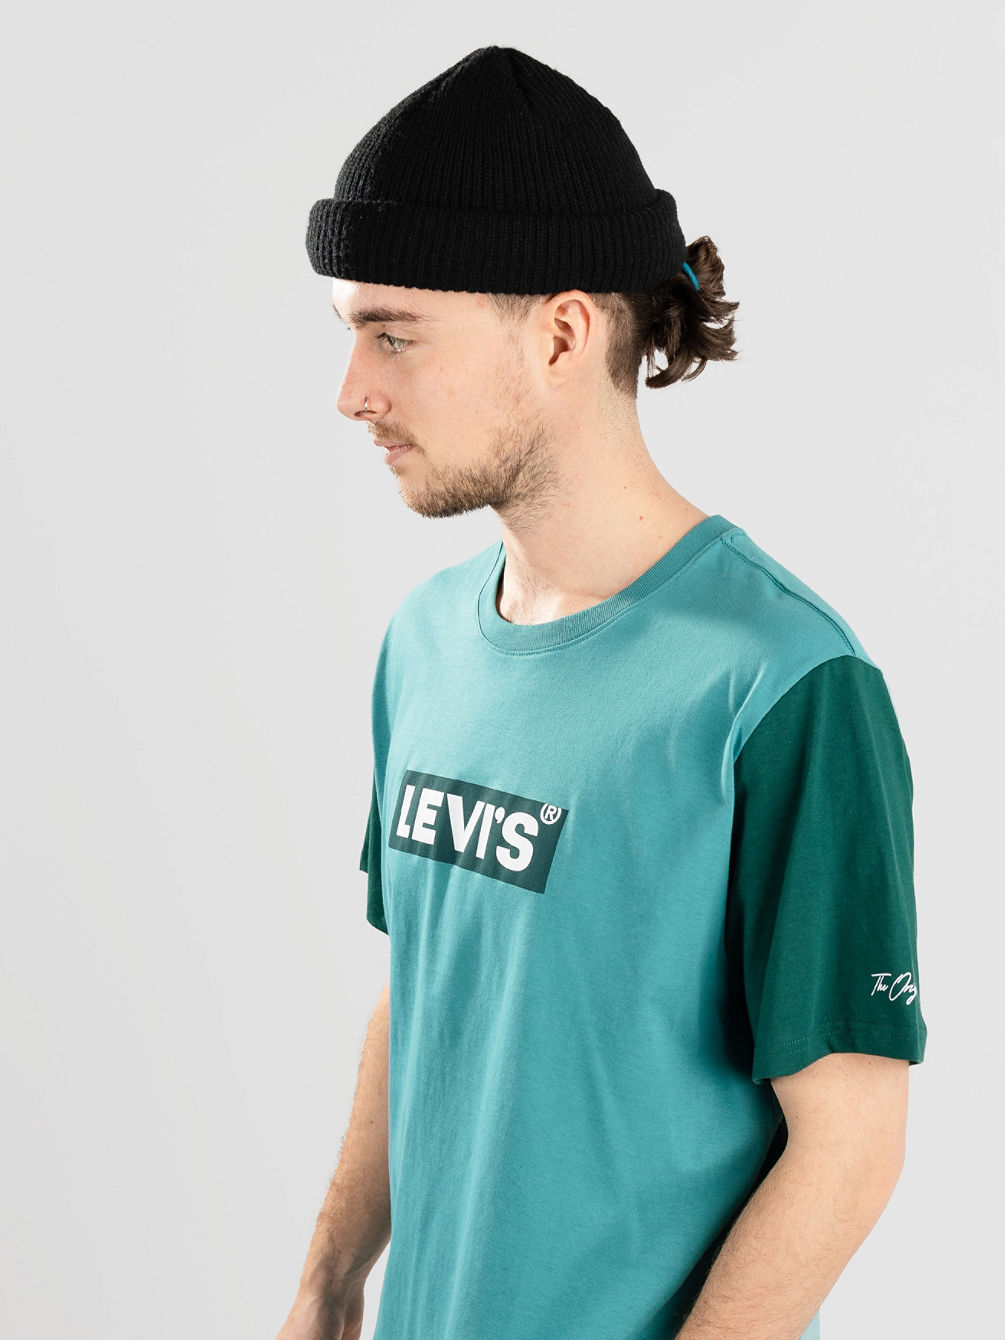 Levi's Relaxed Fit Reds T-Shirt - buy at Blue Tomato